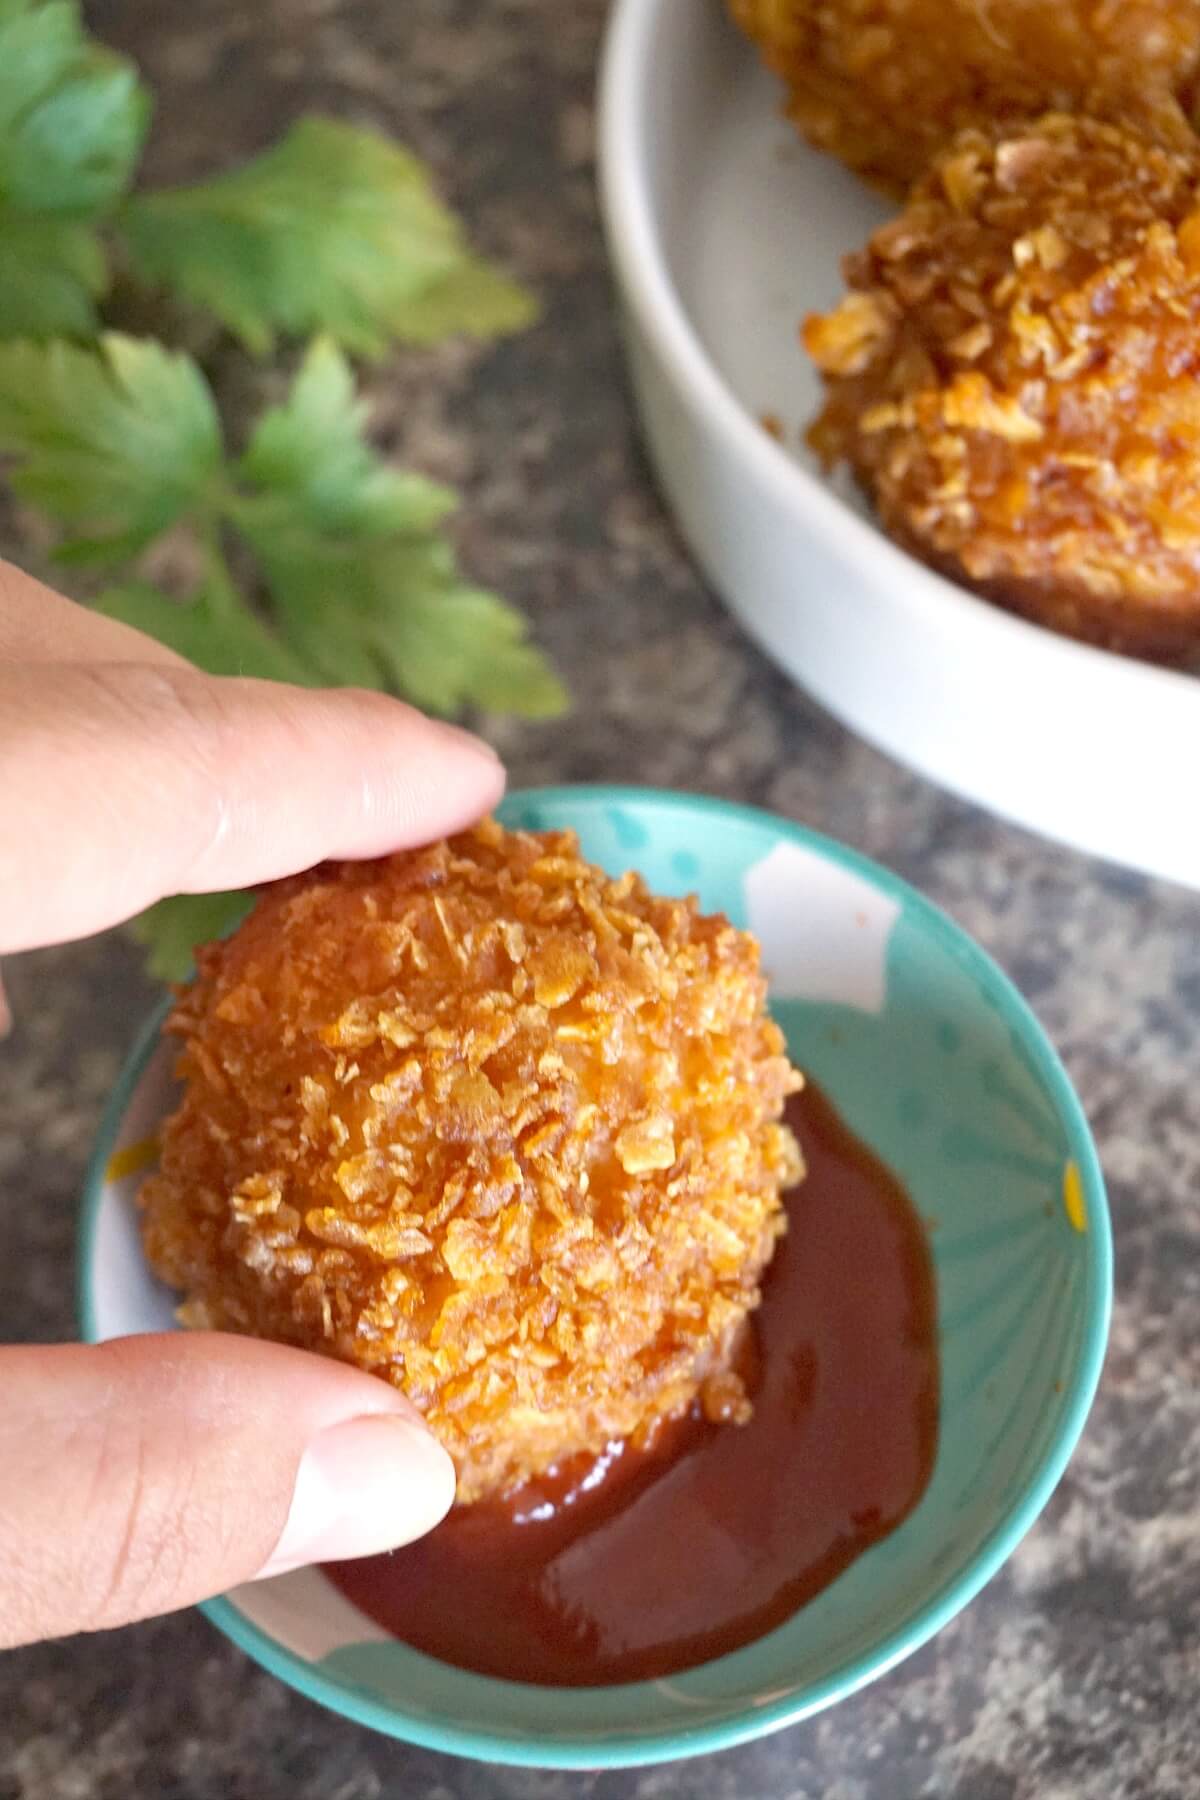 A popcorn chicken ball being dipped into ketchup.